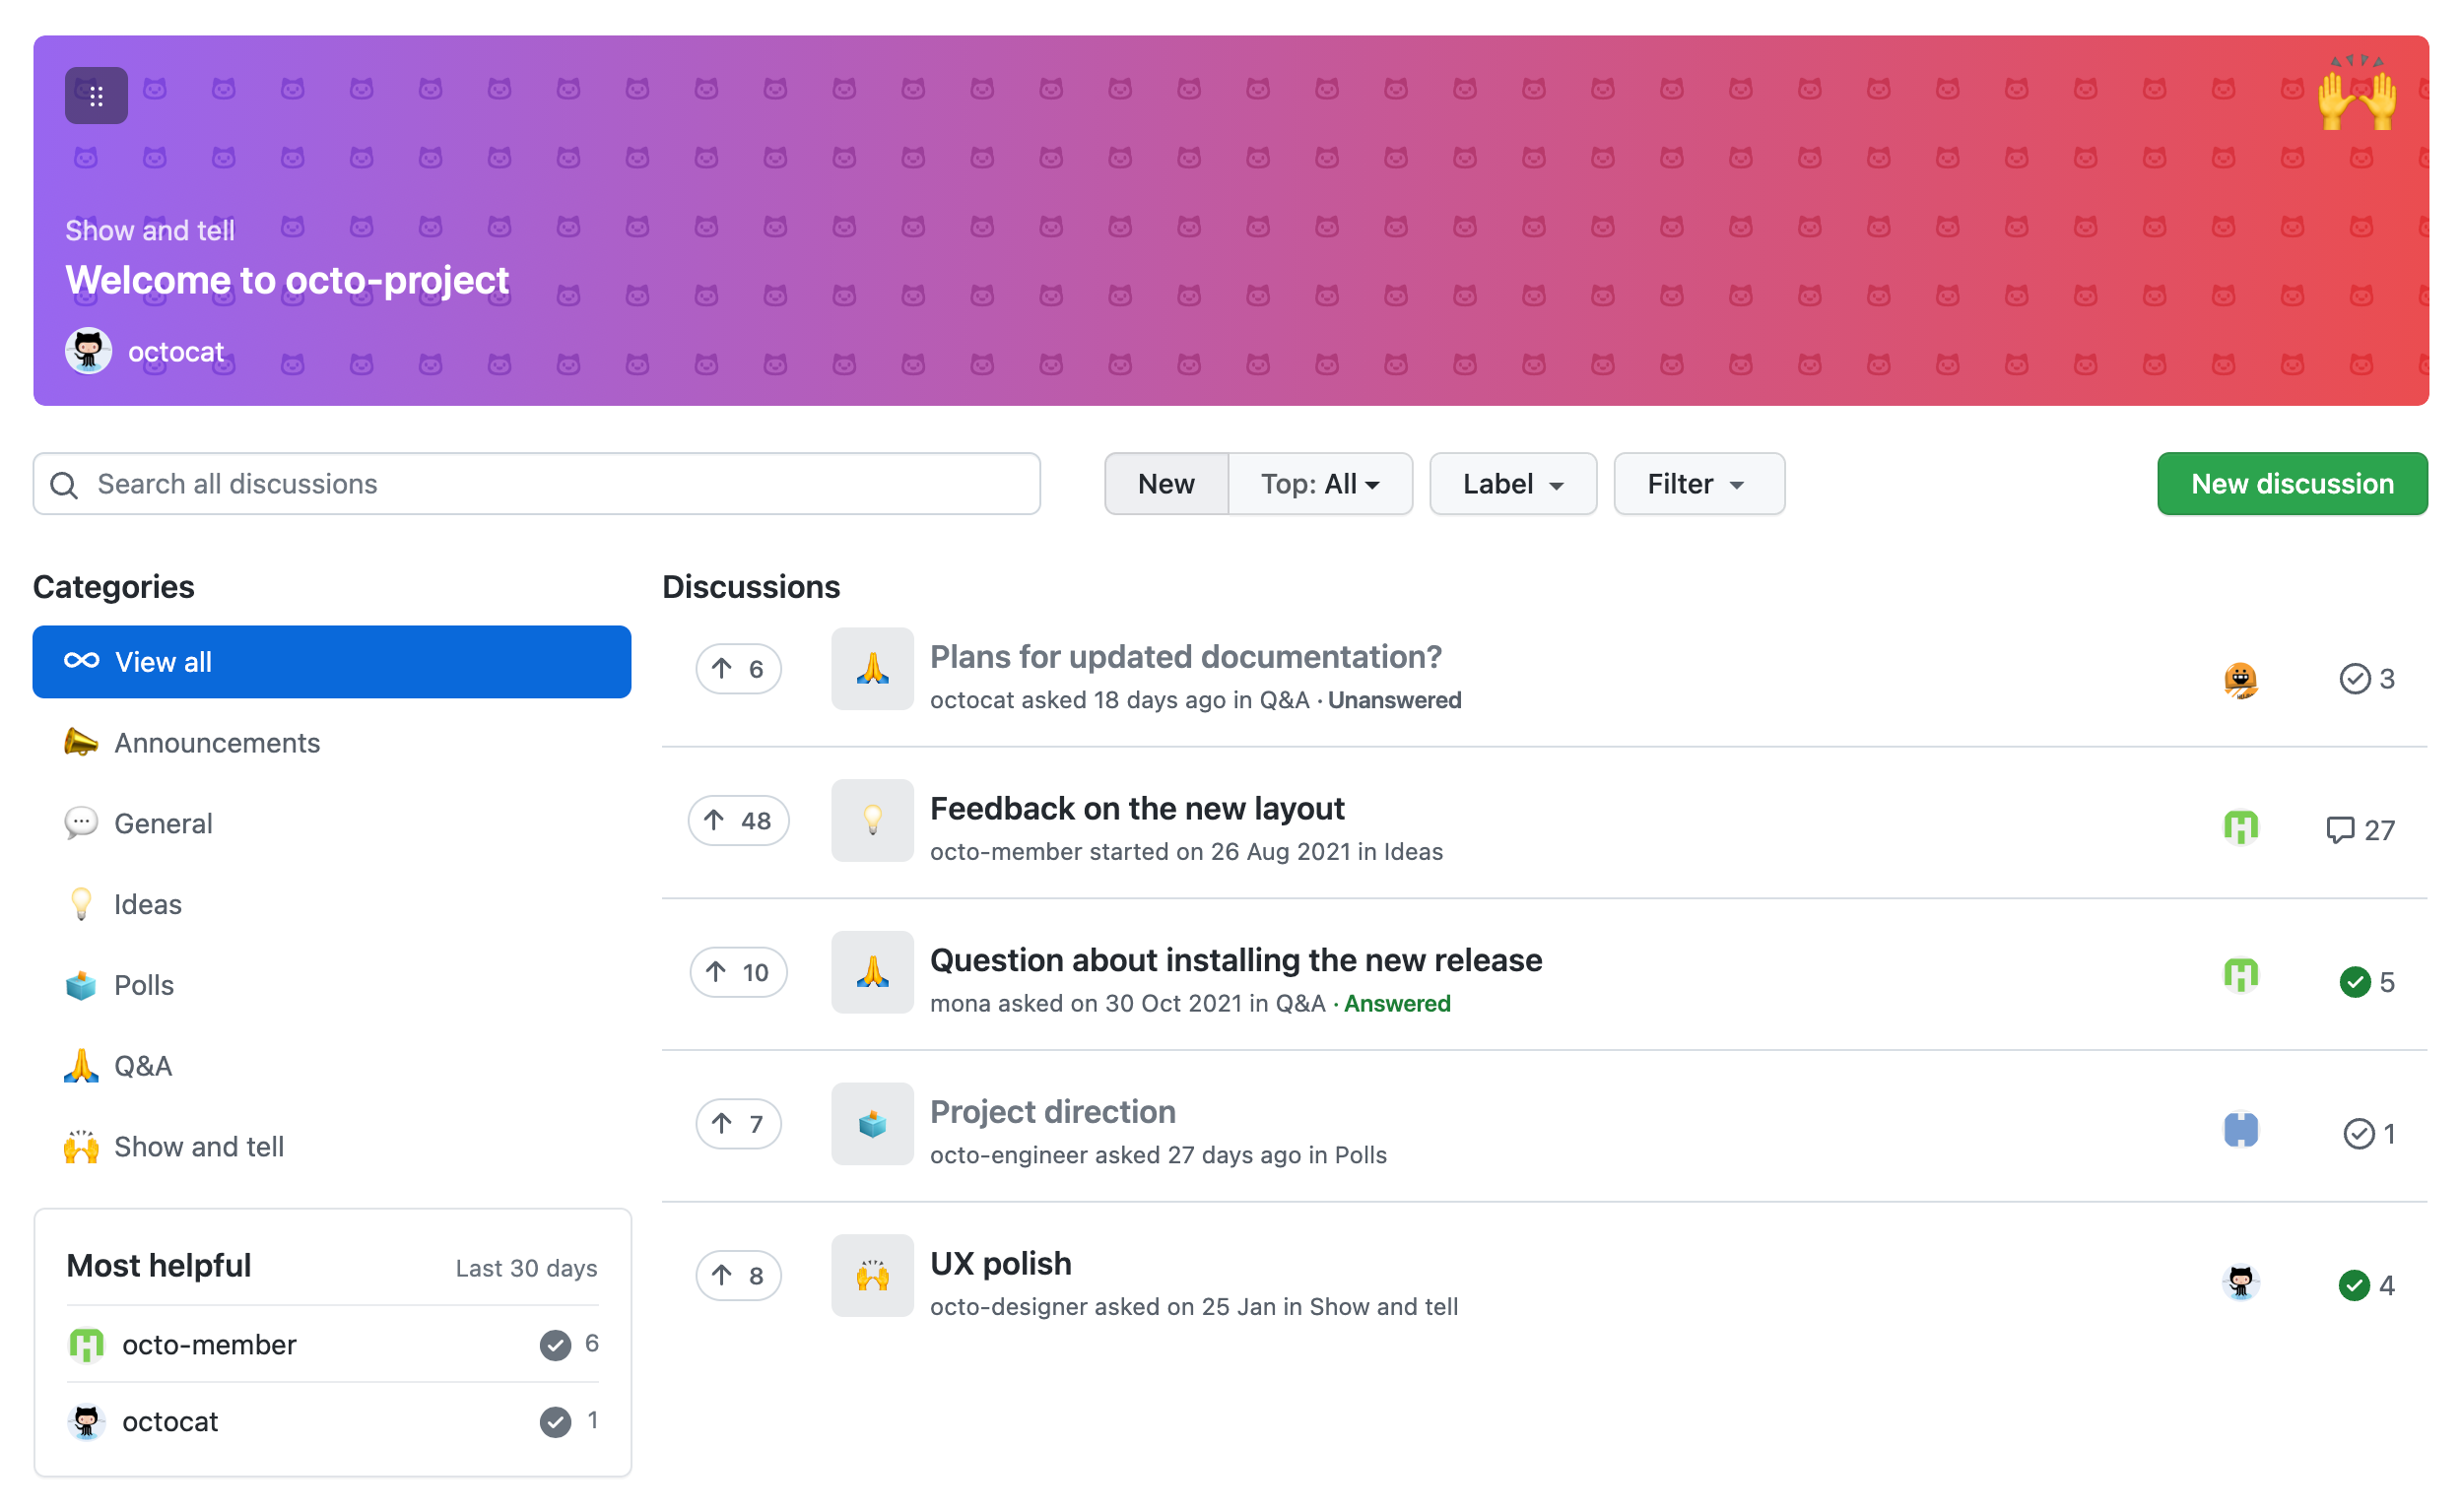 Screenshot of the "Discussions" page for a GitHub repository, showing a list of discussions such as "Feedback on the new layout" and "Project direction".